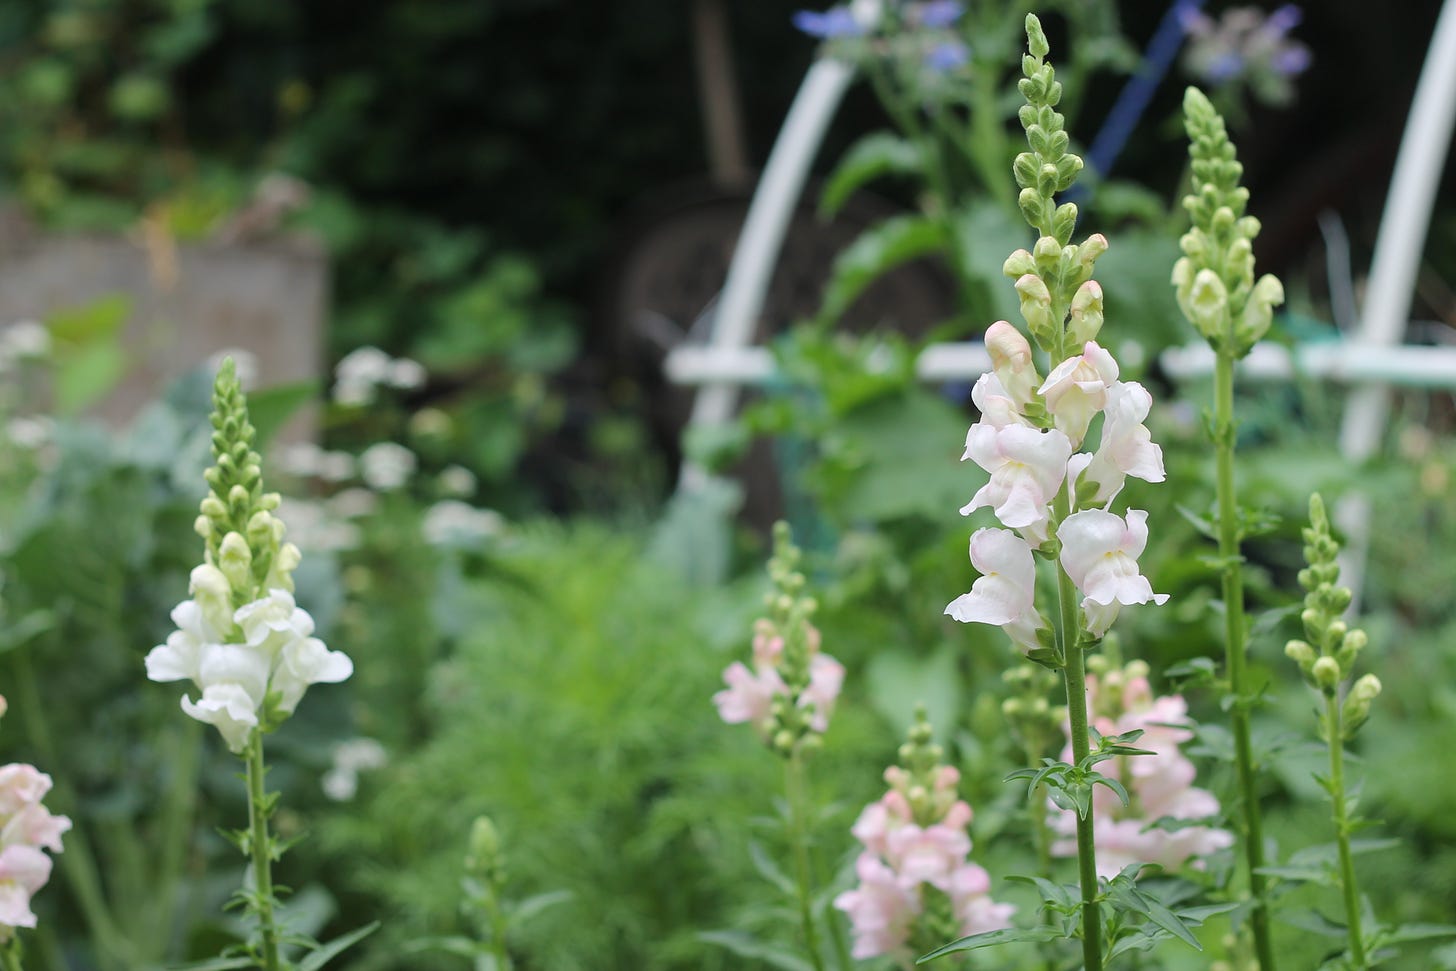 About five spear-like snapdragons, with bottom blossoms open, a pale white and pink